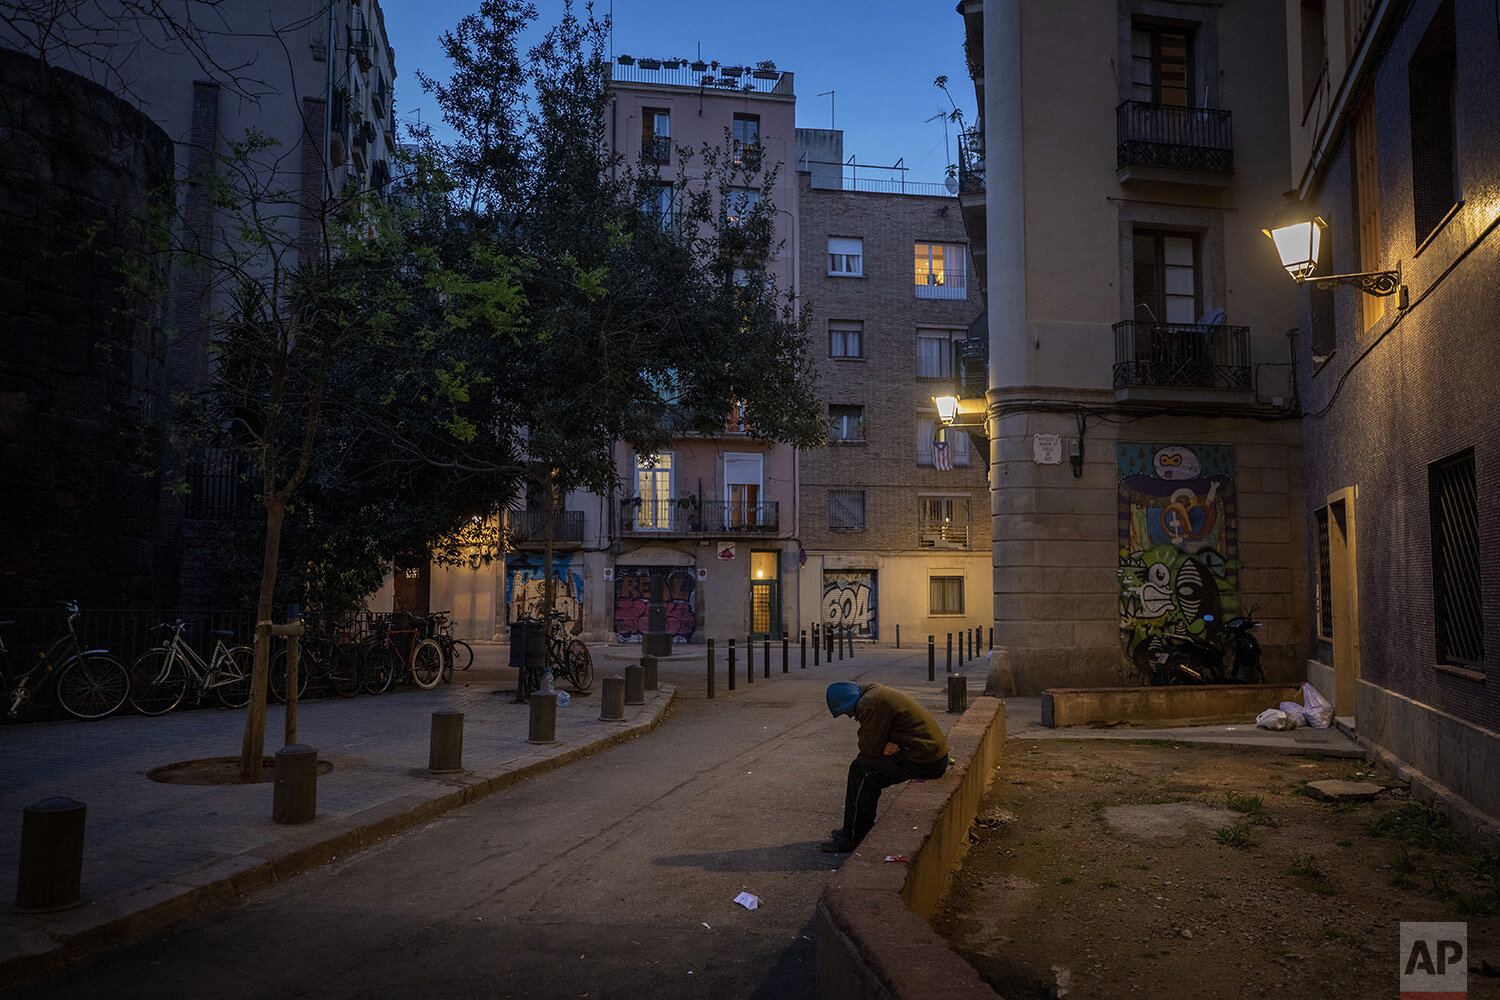  In this Friday, March 20, 2020, Gana Gutierrez sits in an empty street in Barcelona, Spain. ???It is as if there has been a nuclear explosion and they are all sheltering in the bunker. Only us, the homeless, are left out " explains 36-year-old Gana,